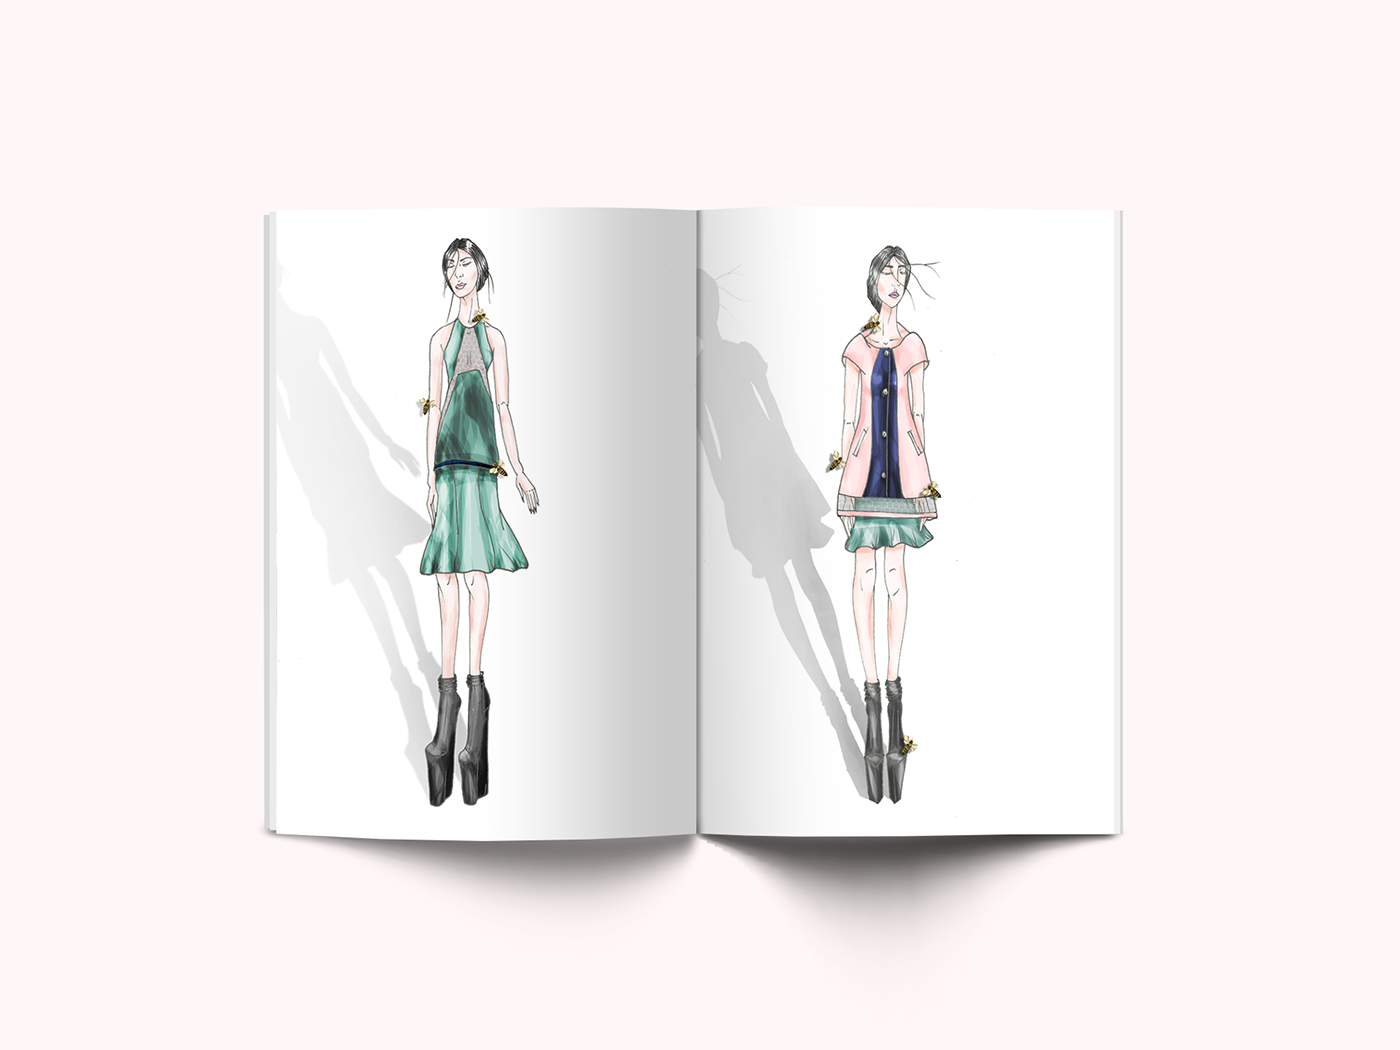 fashion illustration tideland movie inspired colors sewing